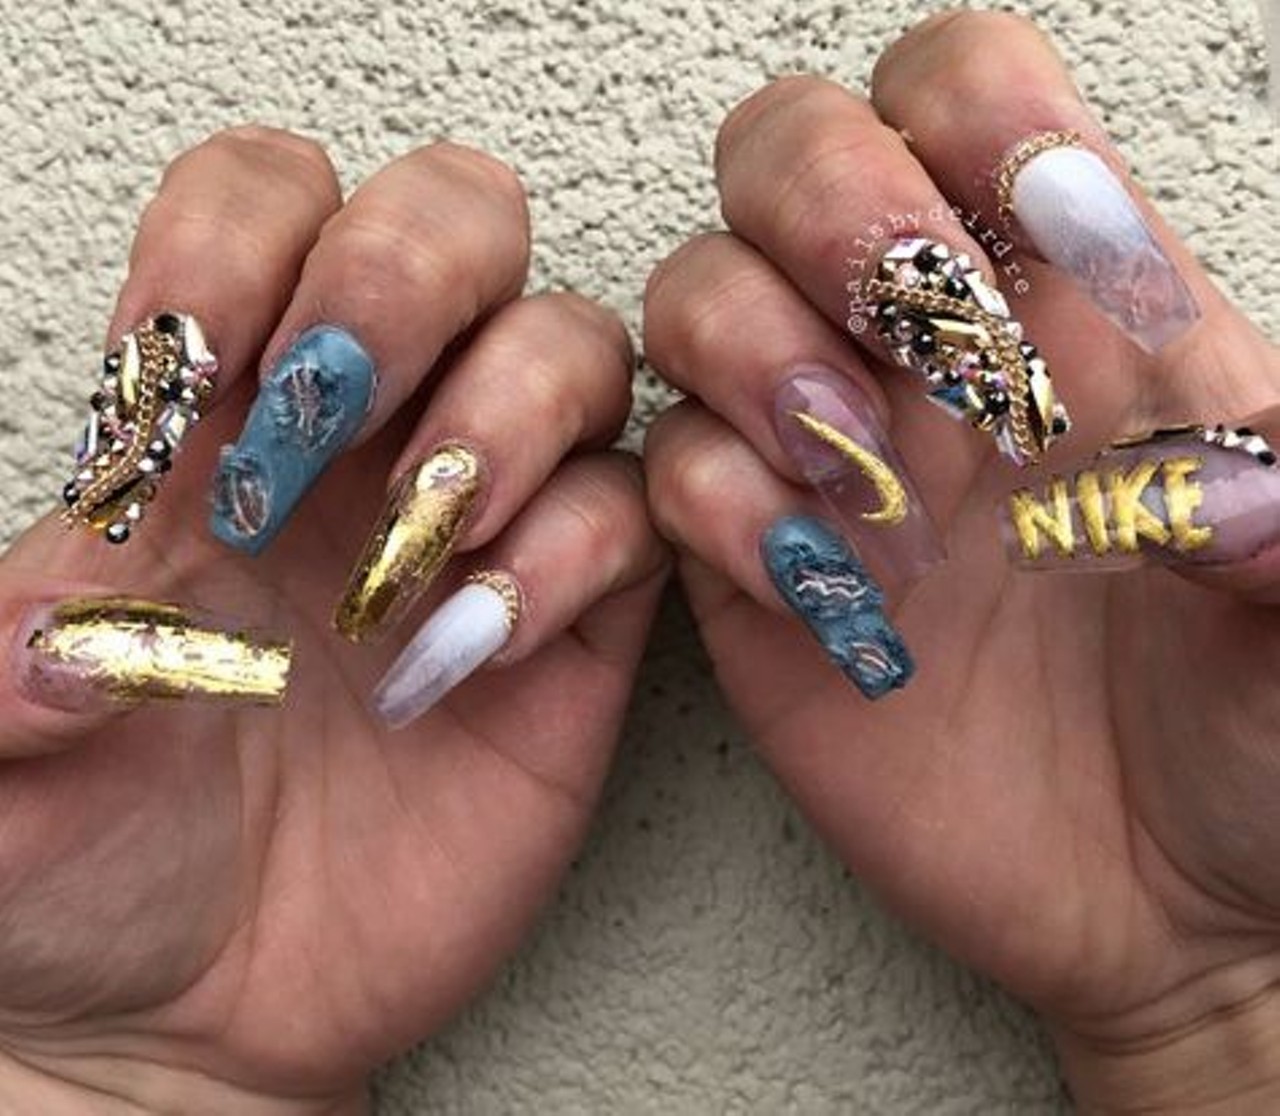  nailsbydeirdre 
21139 Lorain Rd., Suite 10, Fairview Park  
Able to work with both nails and lashes, Deirdre Lowery is co-owner of Elysian Nail Studio. She takes appointments only.
Photo via nailsbydeirdre/Instagram